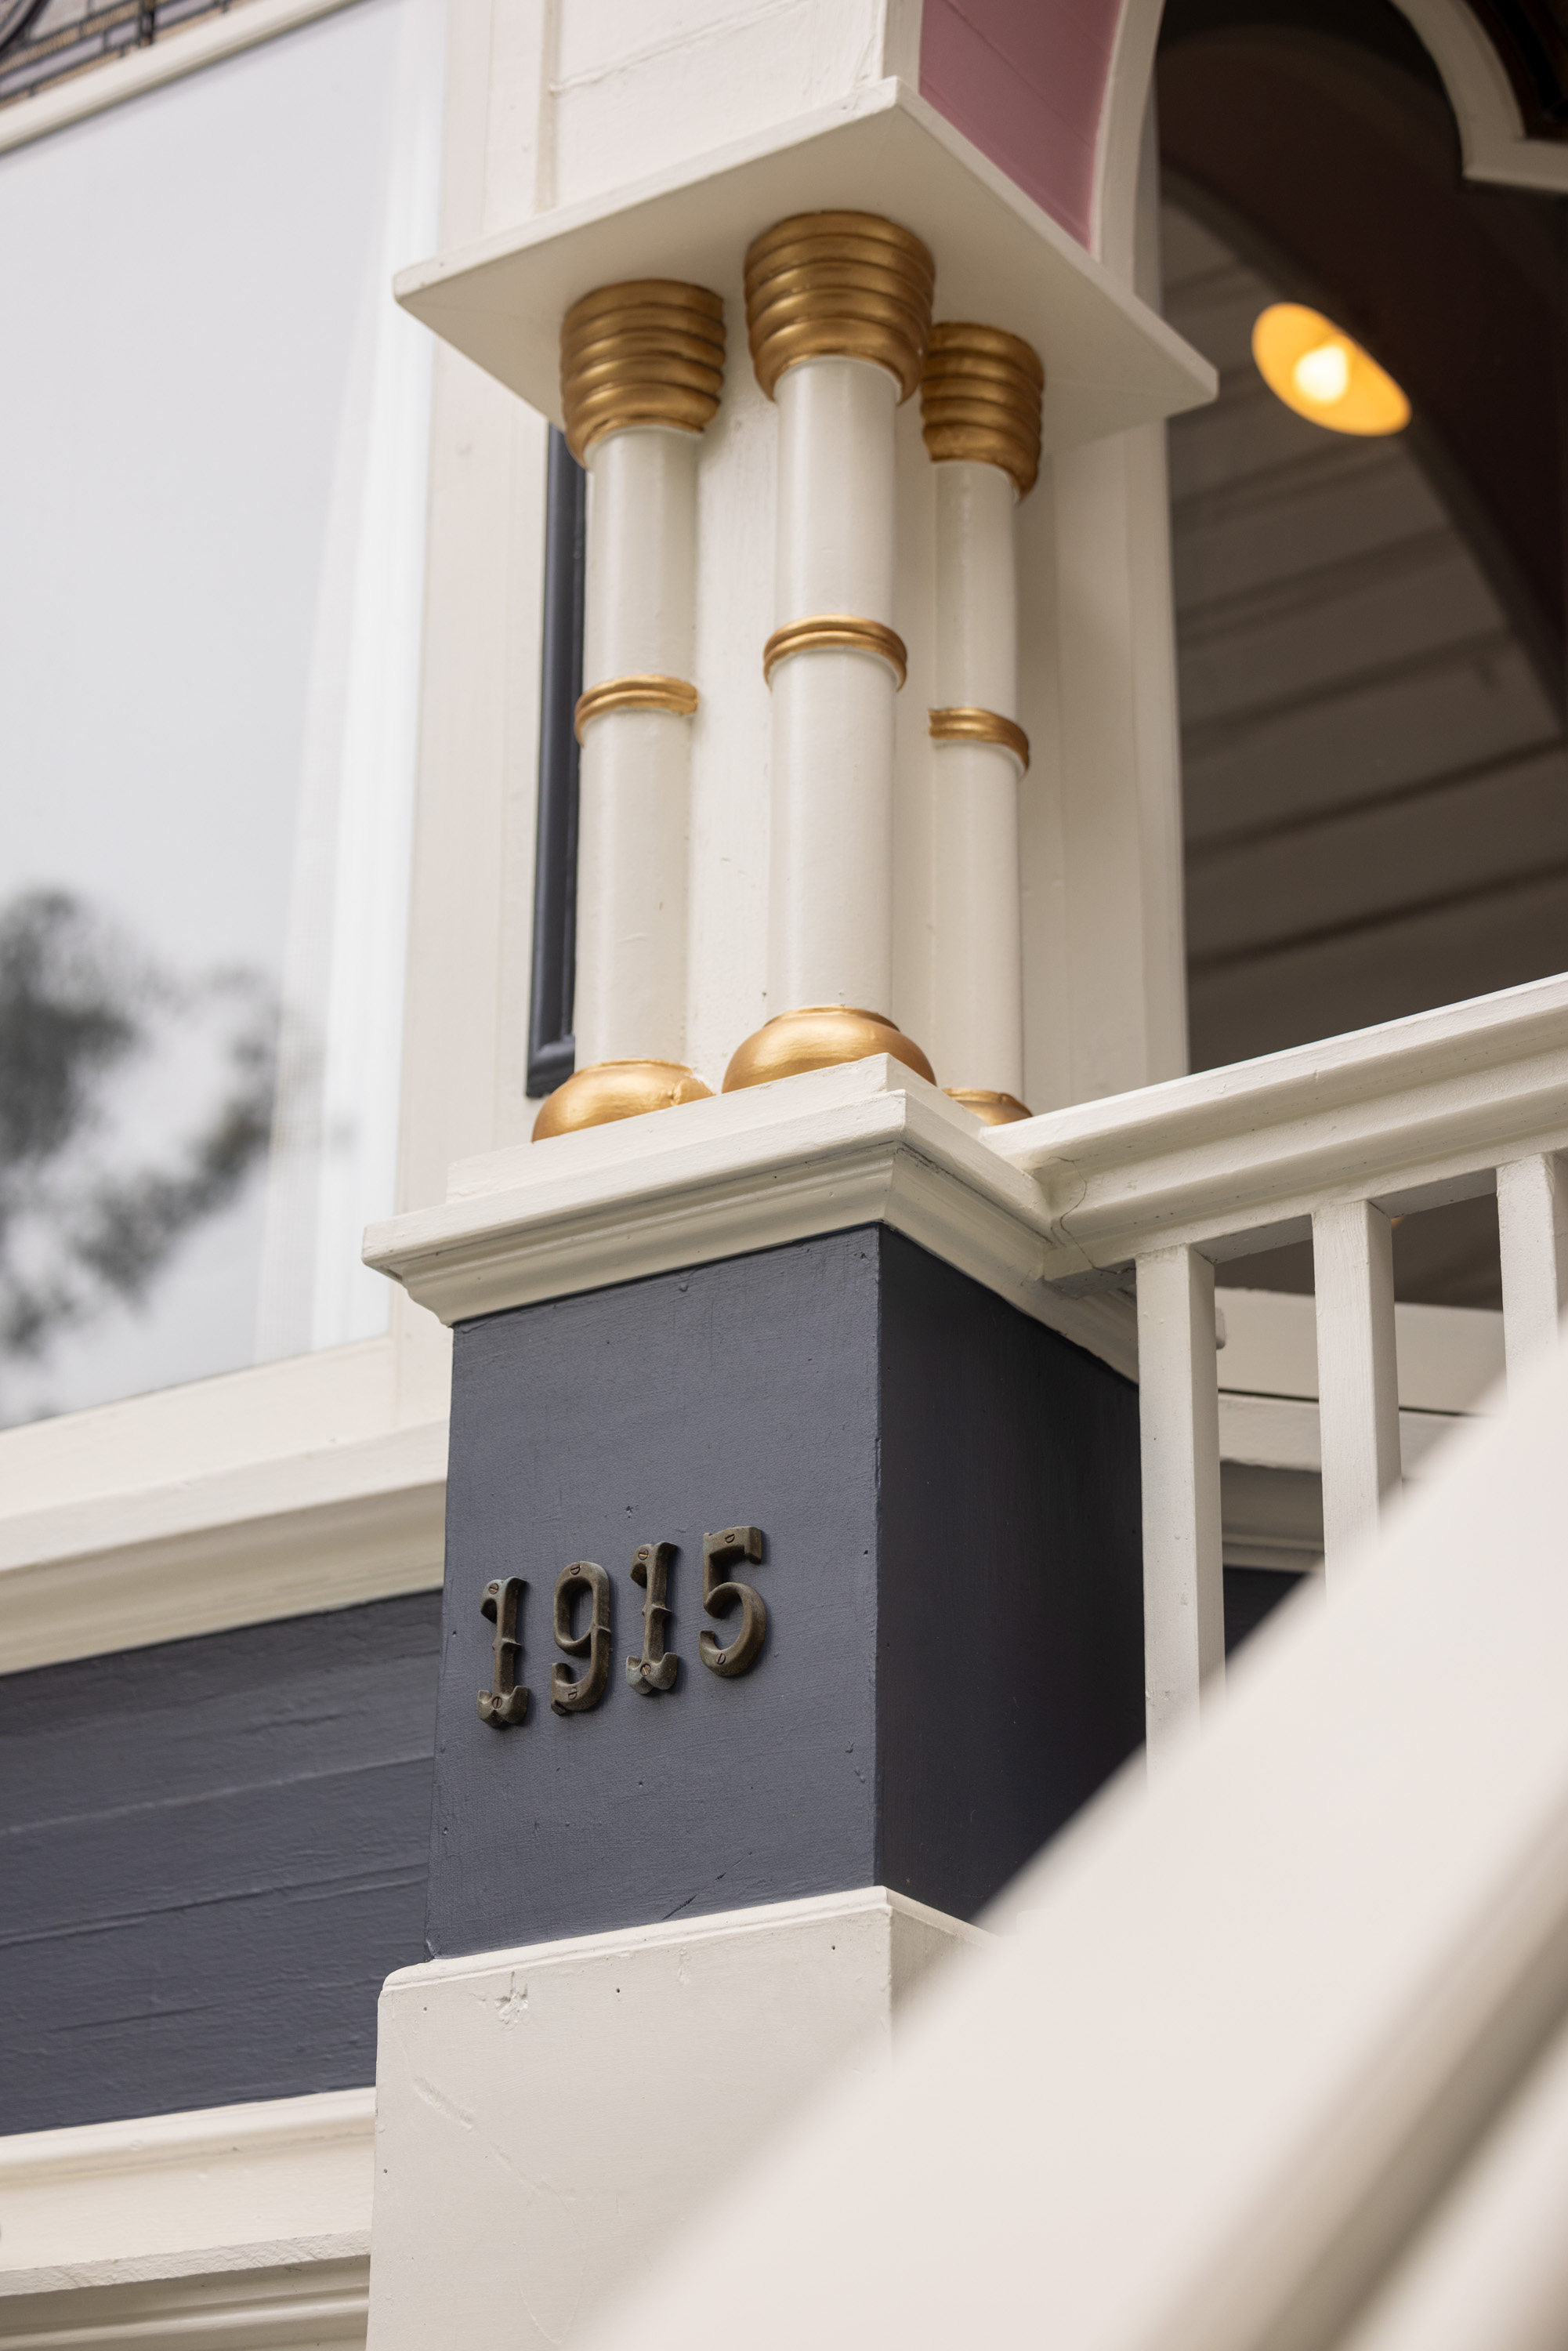 The image shows part of a building's exterior with ornate columns featuring gold accents and the number &quot;1915&quot; displayed on a dark blue panel.